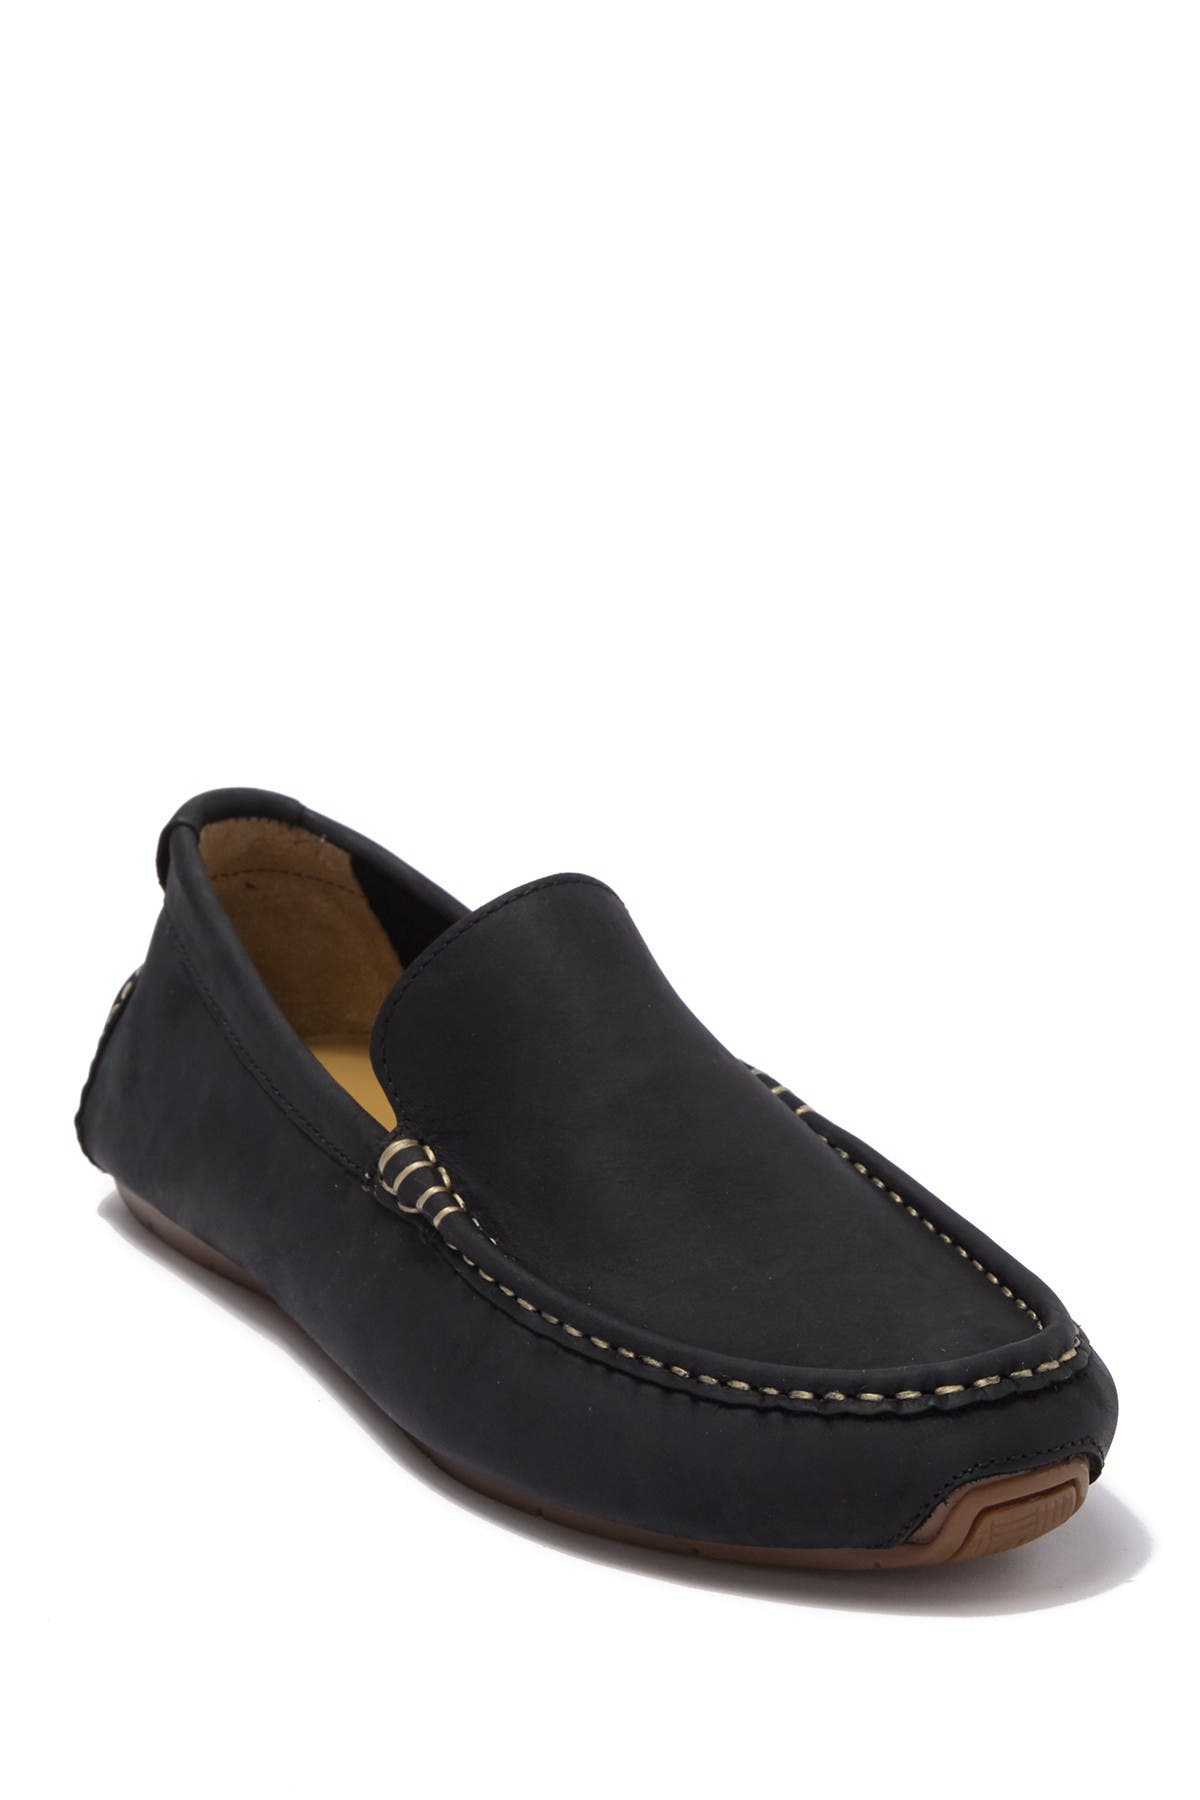 cole haan somerset loafer